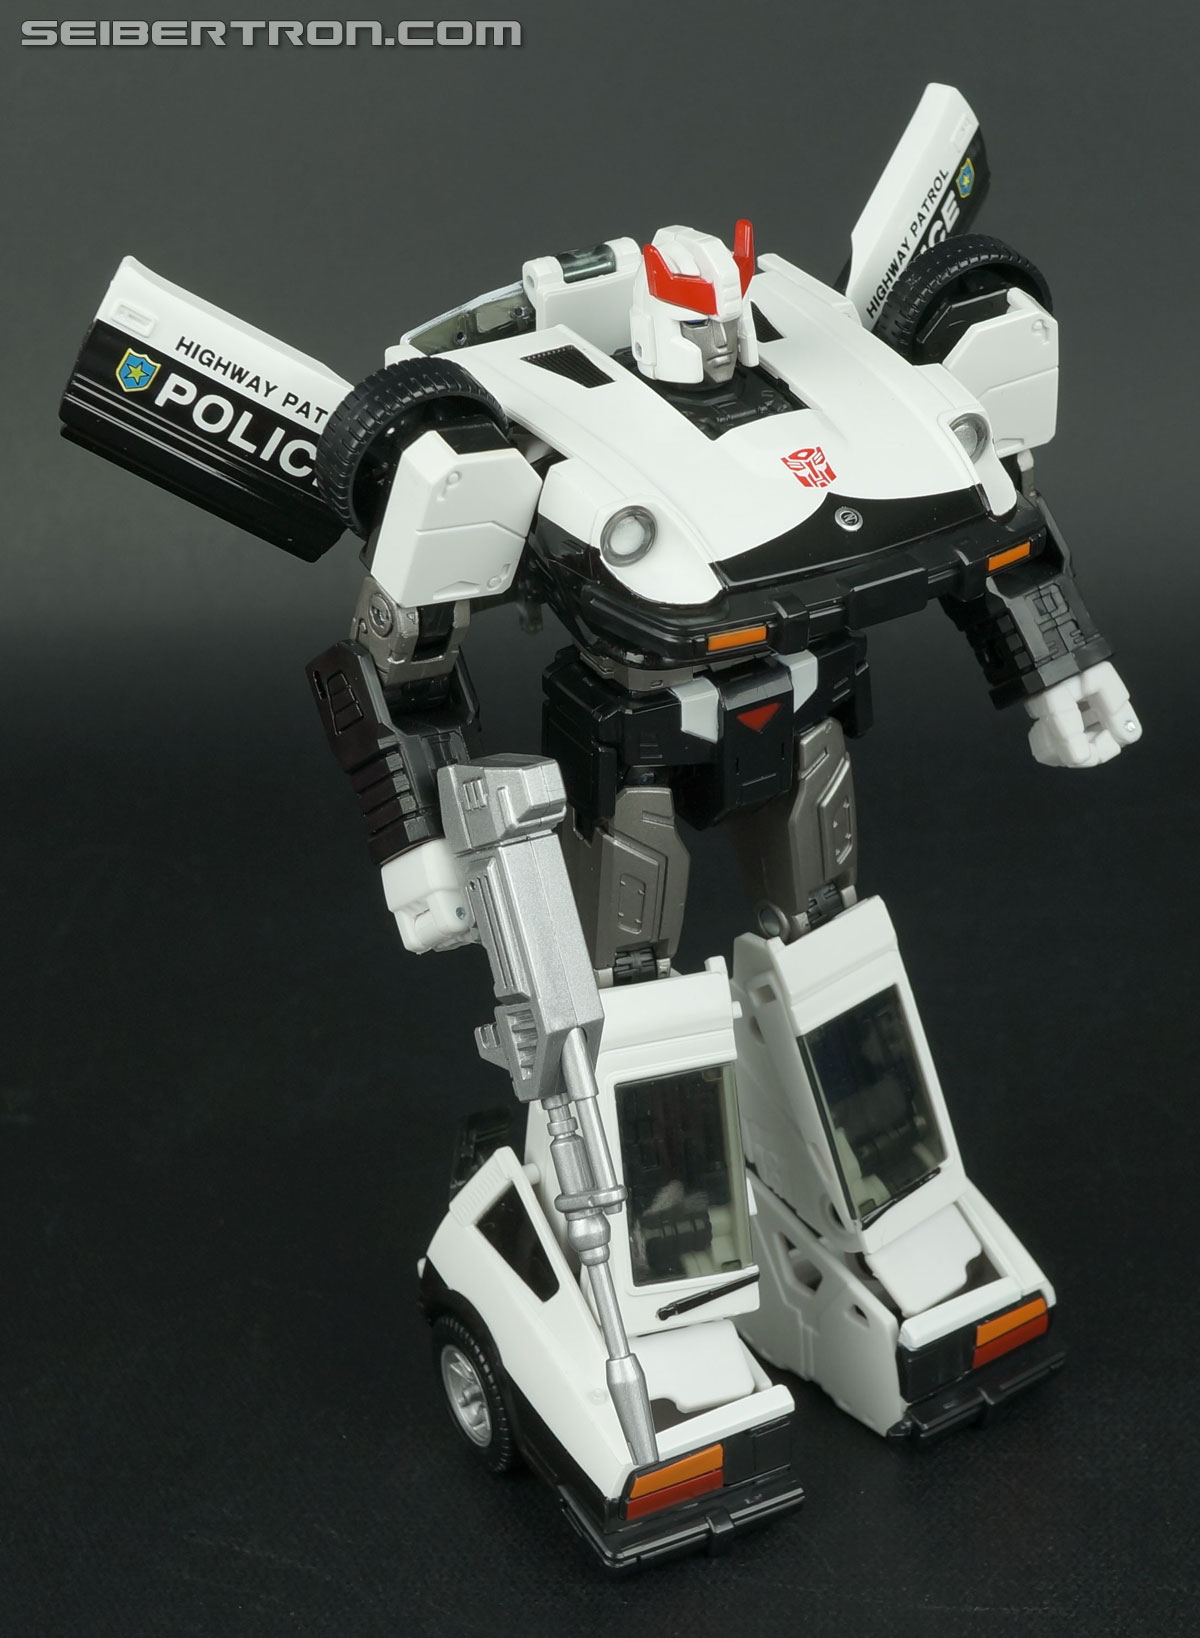 Transformers Masterpiece Prowl (Image #153 of 333)